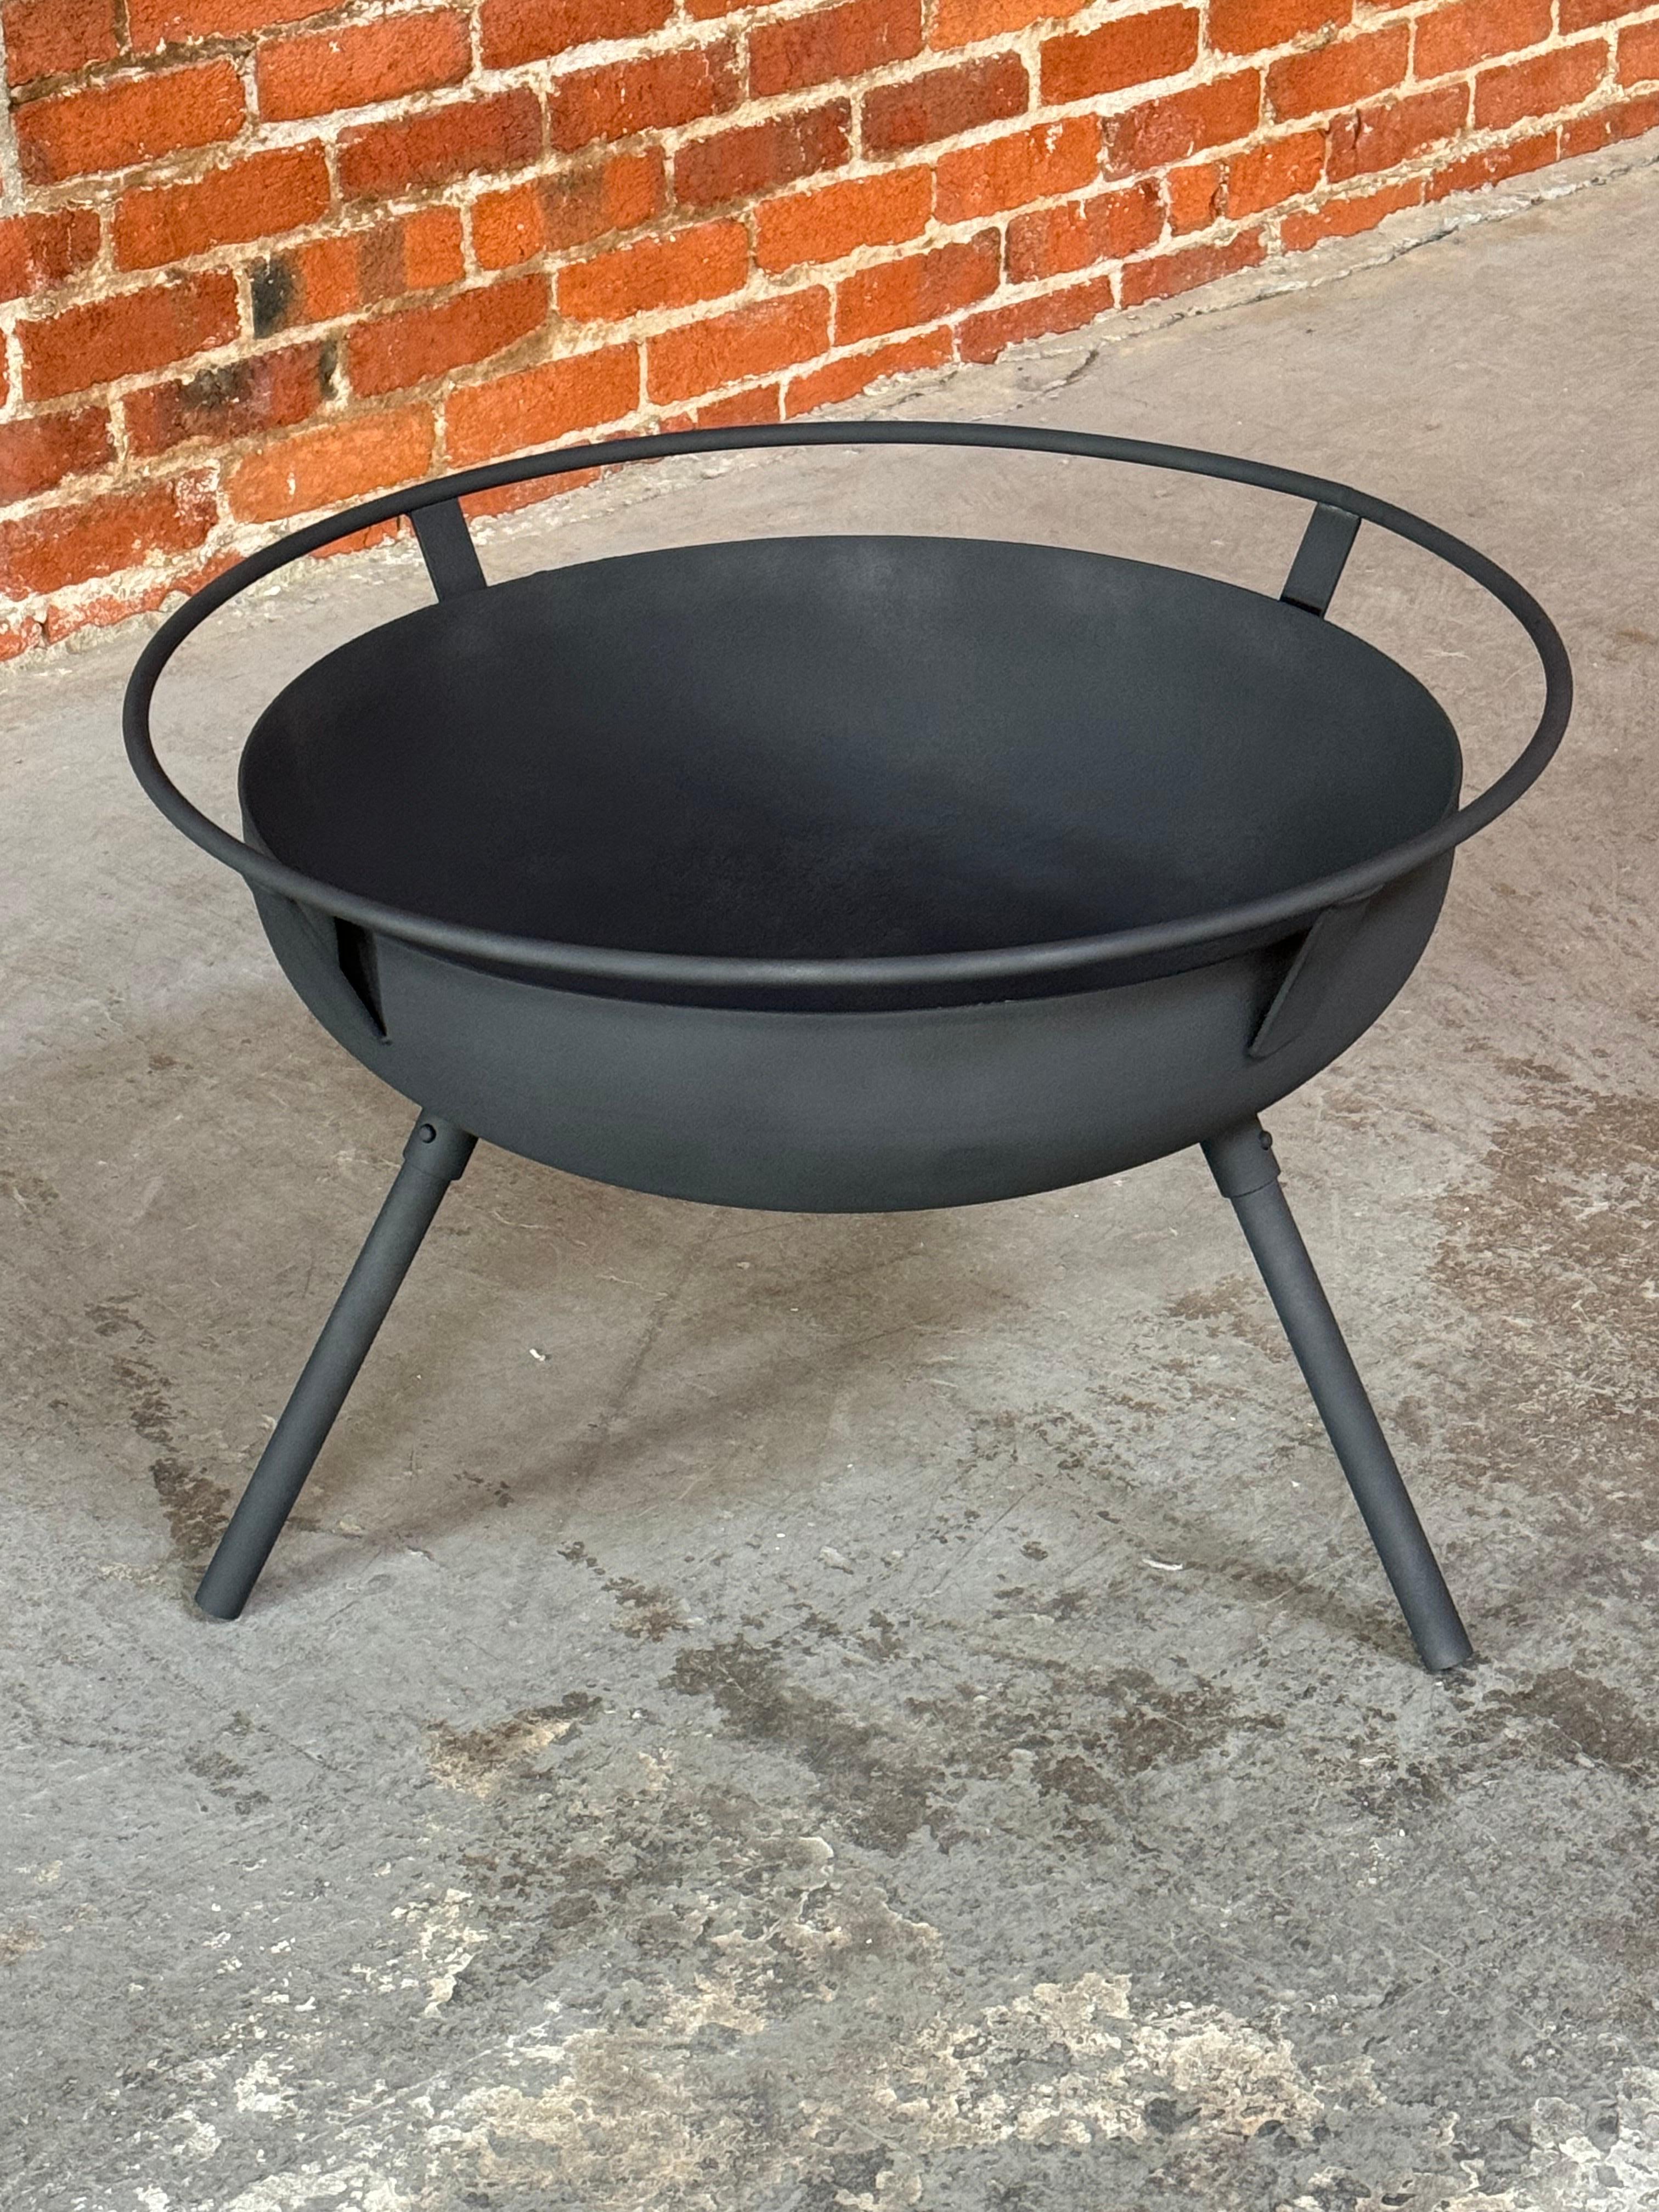 Modernist Design 1950s Three Legged Iron Fire Pit Case Study House For Sale 1